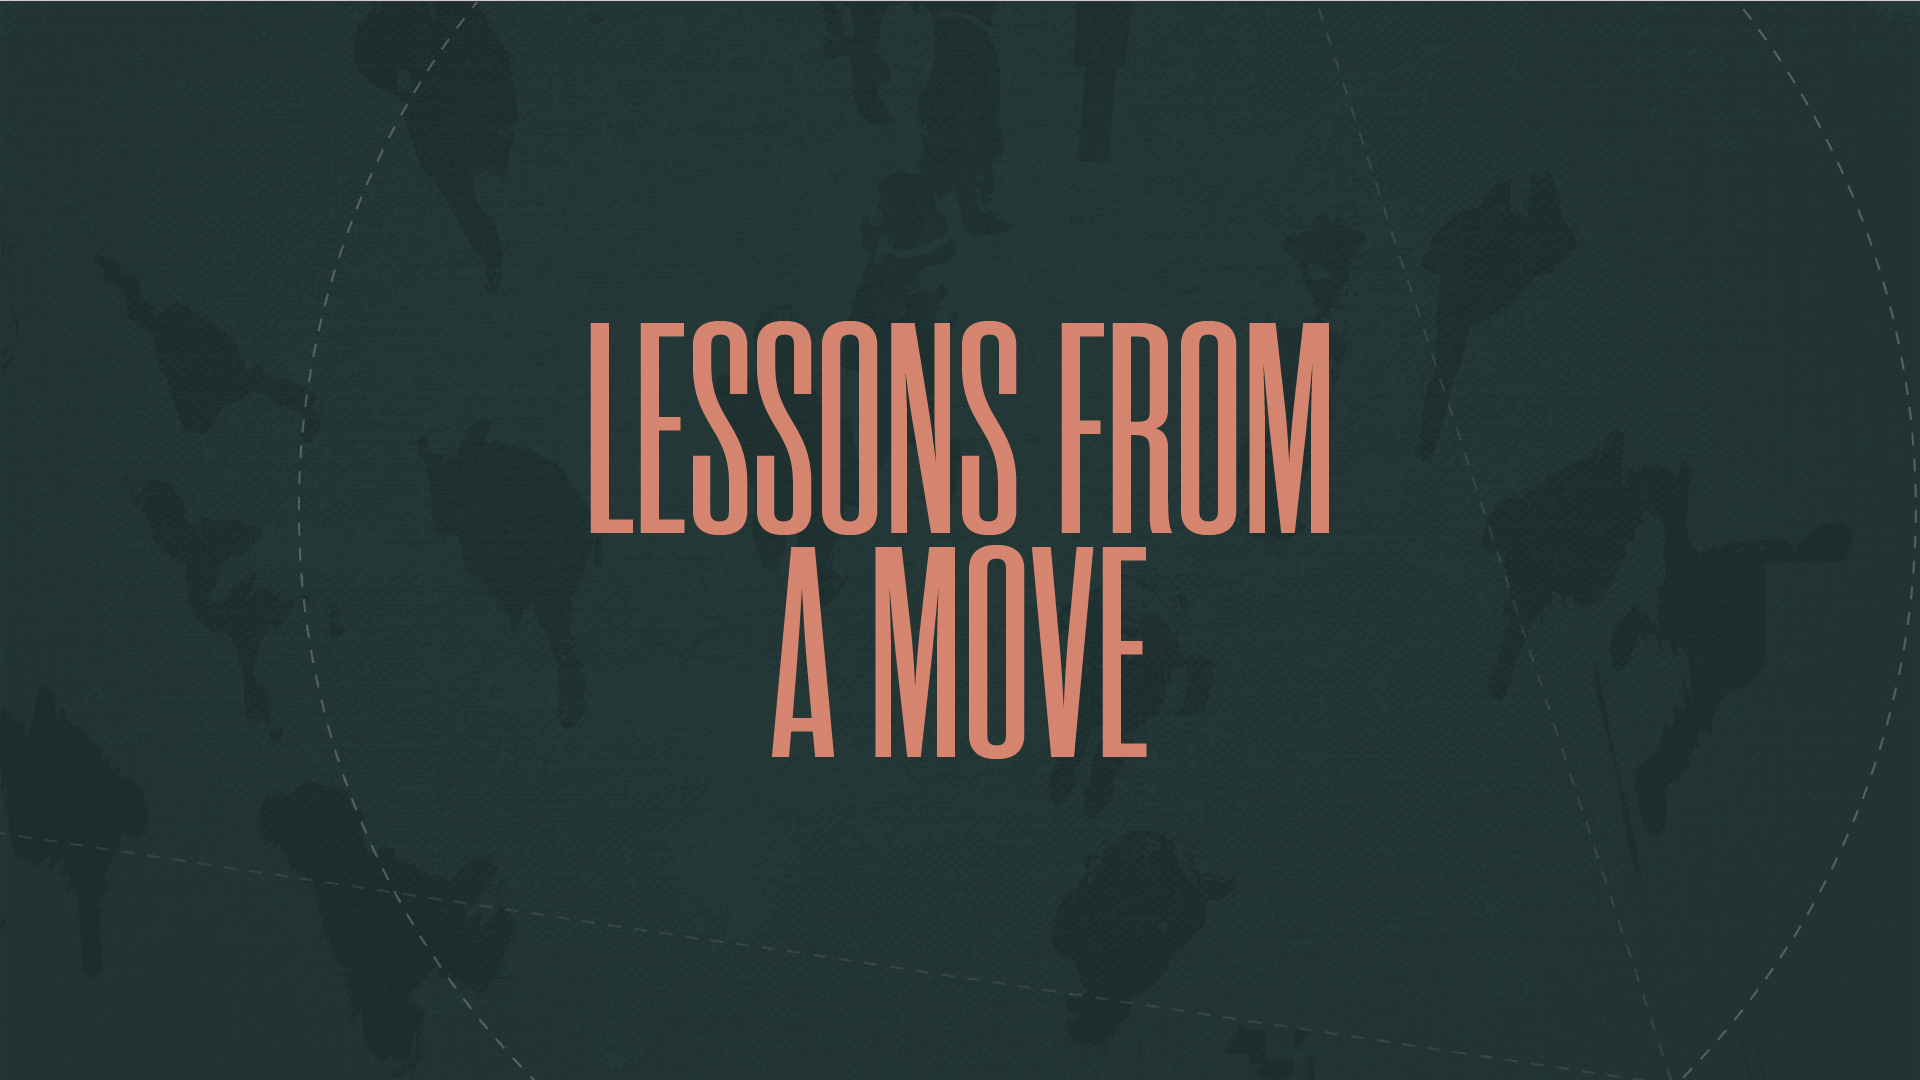 This Is A Move // Lessons From A Move // Josh Turner